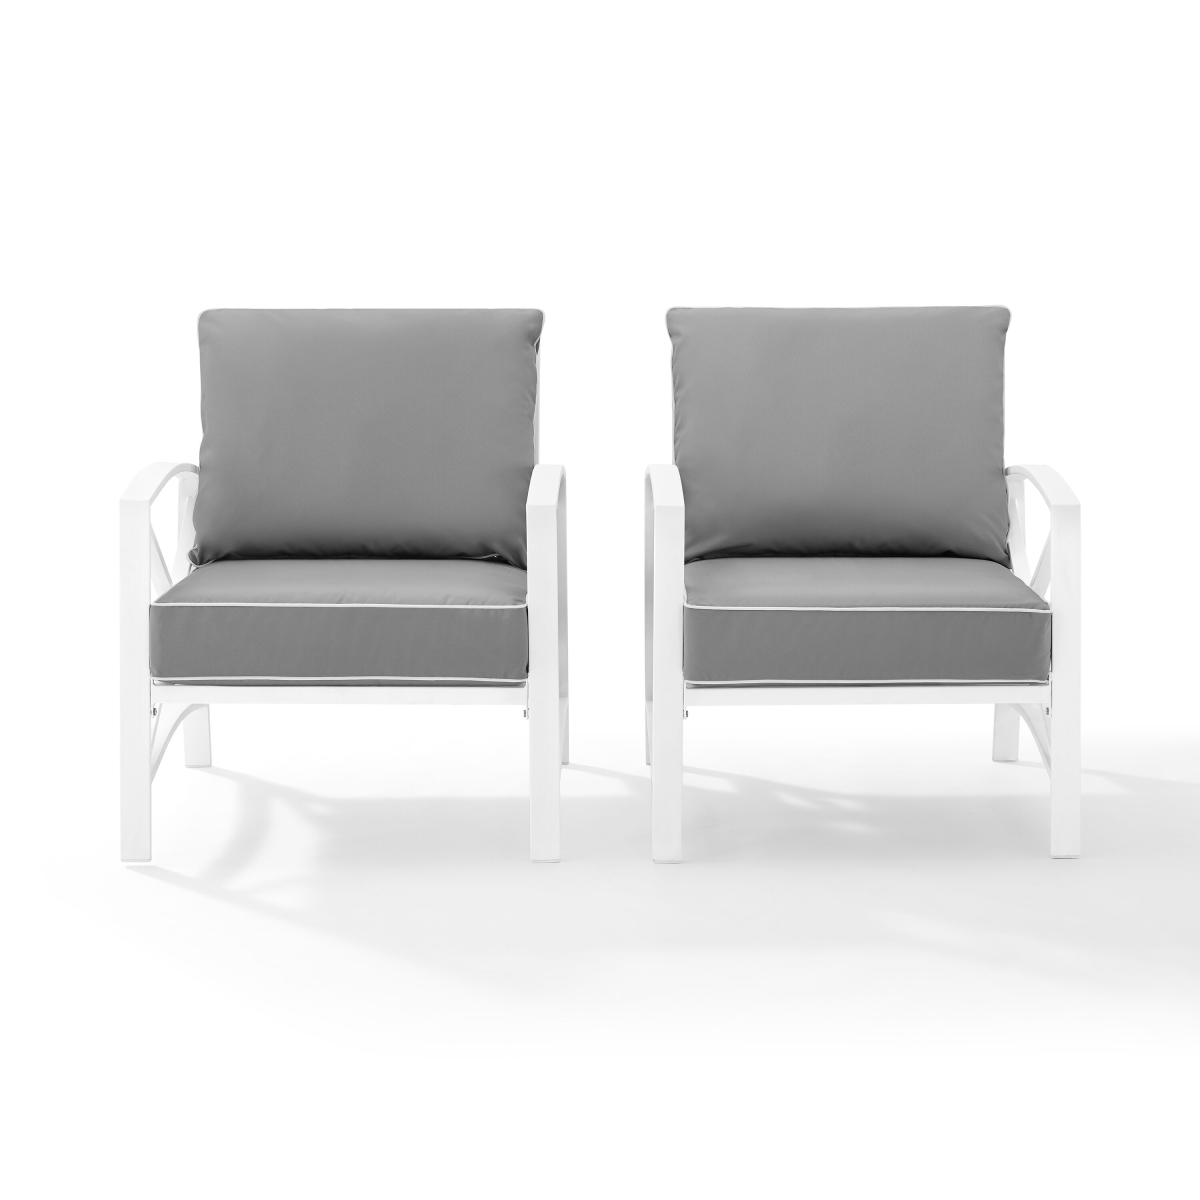 Ko60013wh-gy Kaplan 2-piece Outdoor Seating Set In White With Gray Cushions